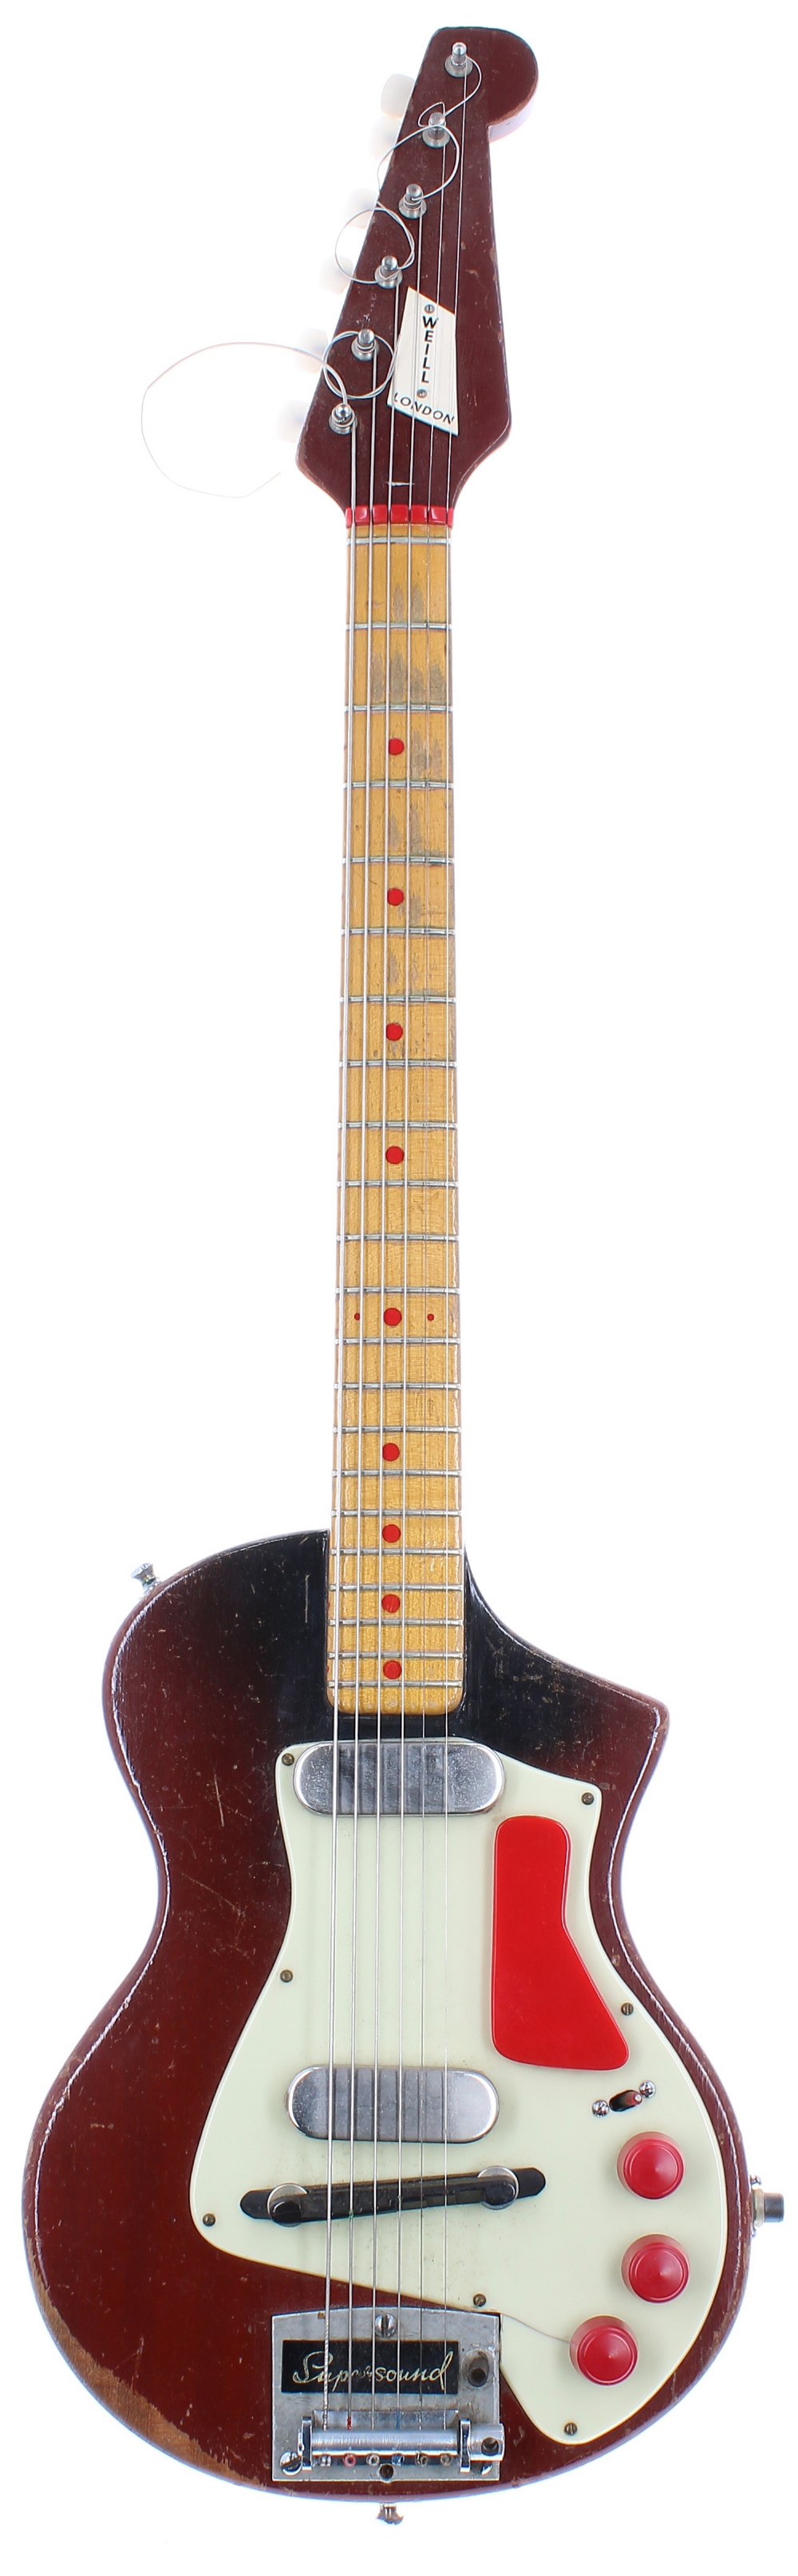 Early 1960s Burns Weill electric guitar, made in England; Finish: cherry, heavy wear allover,